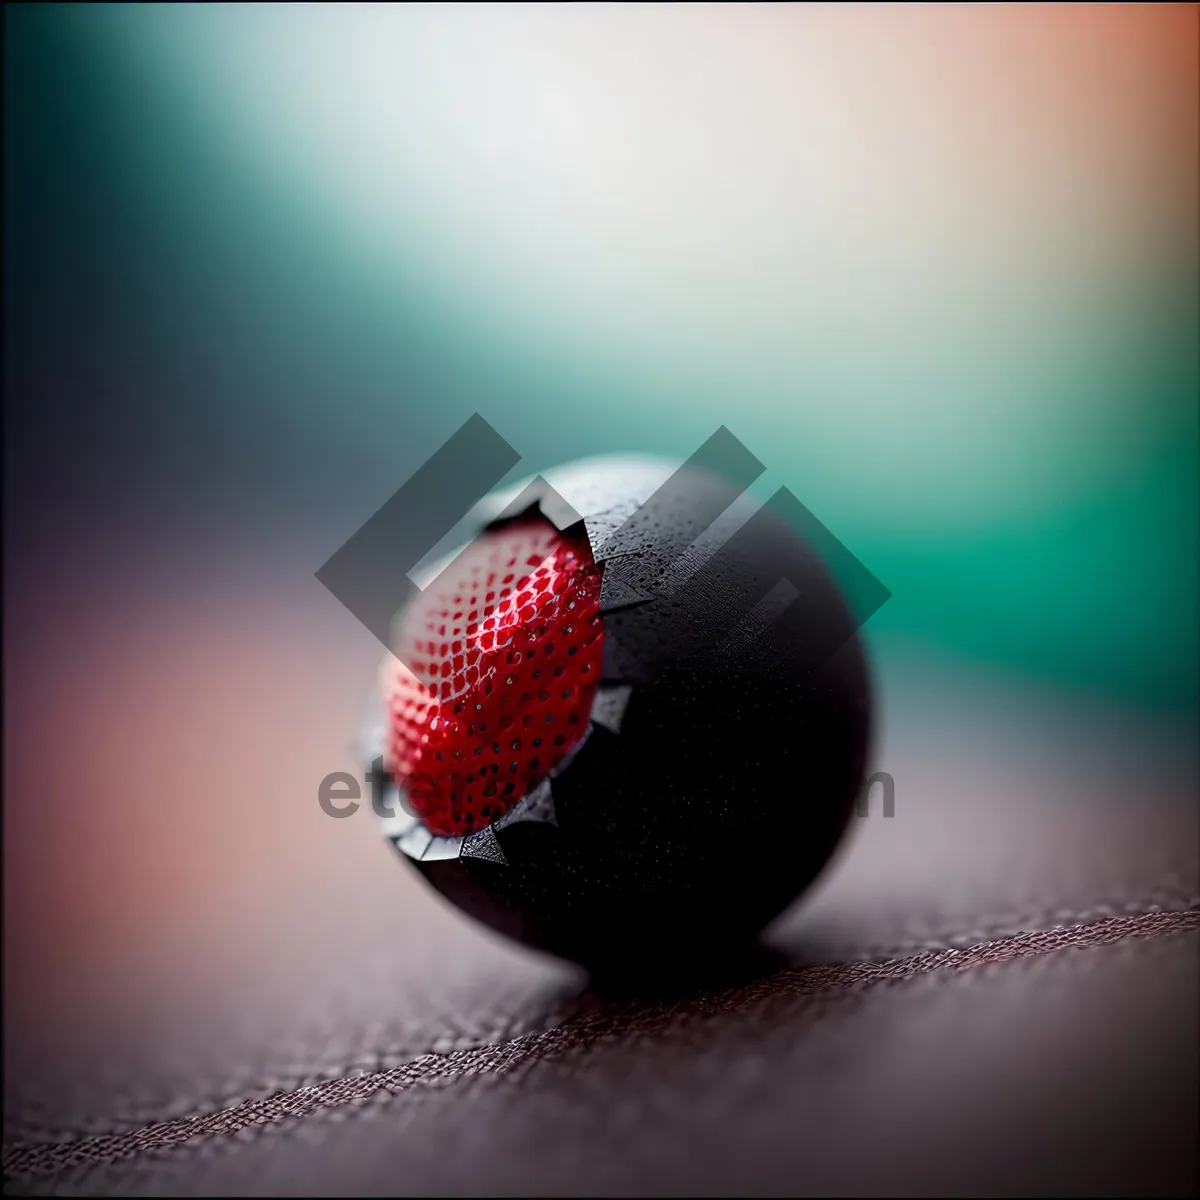 Picture of Golf Ball on Microphone Stand with Berry Fruit